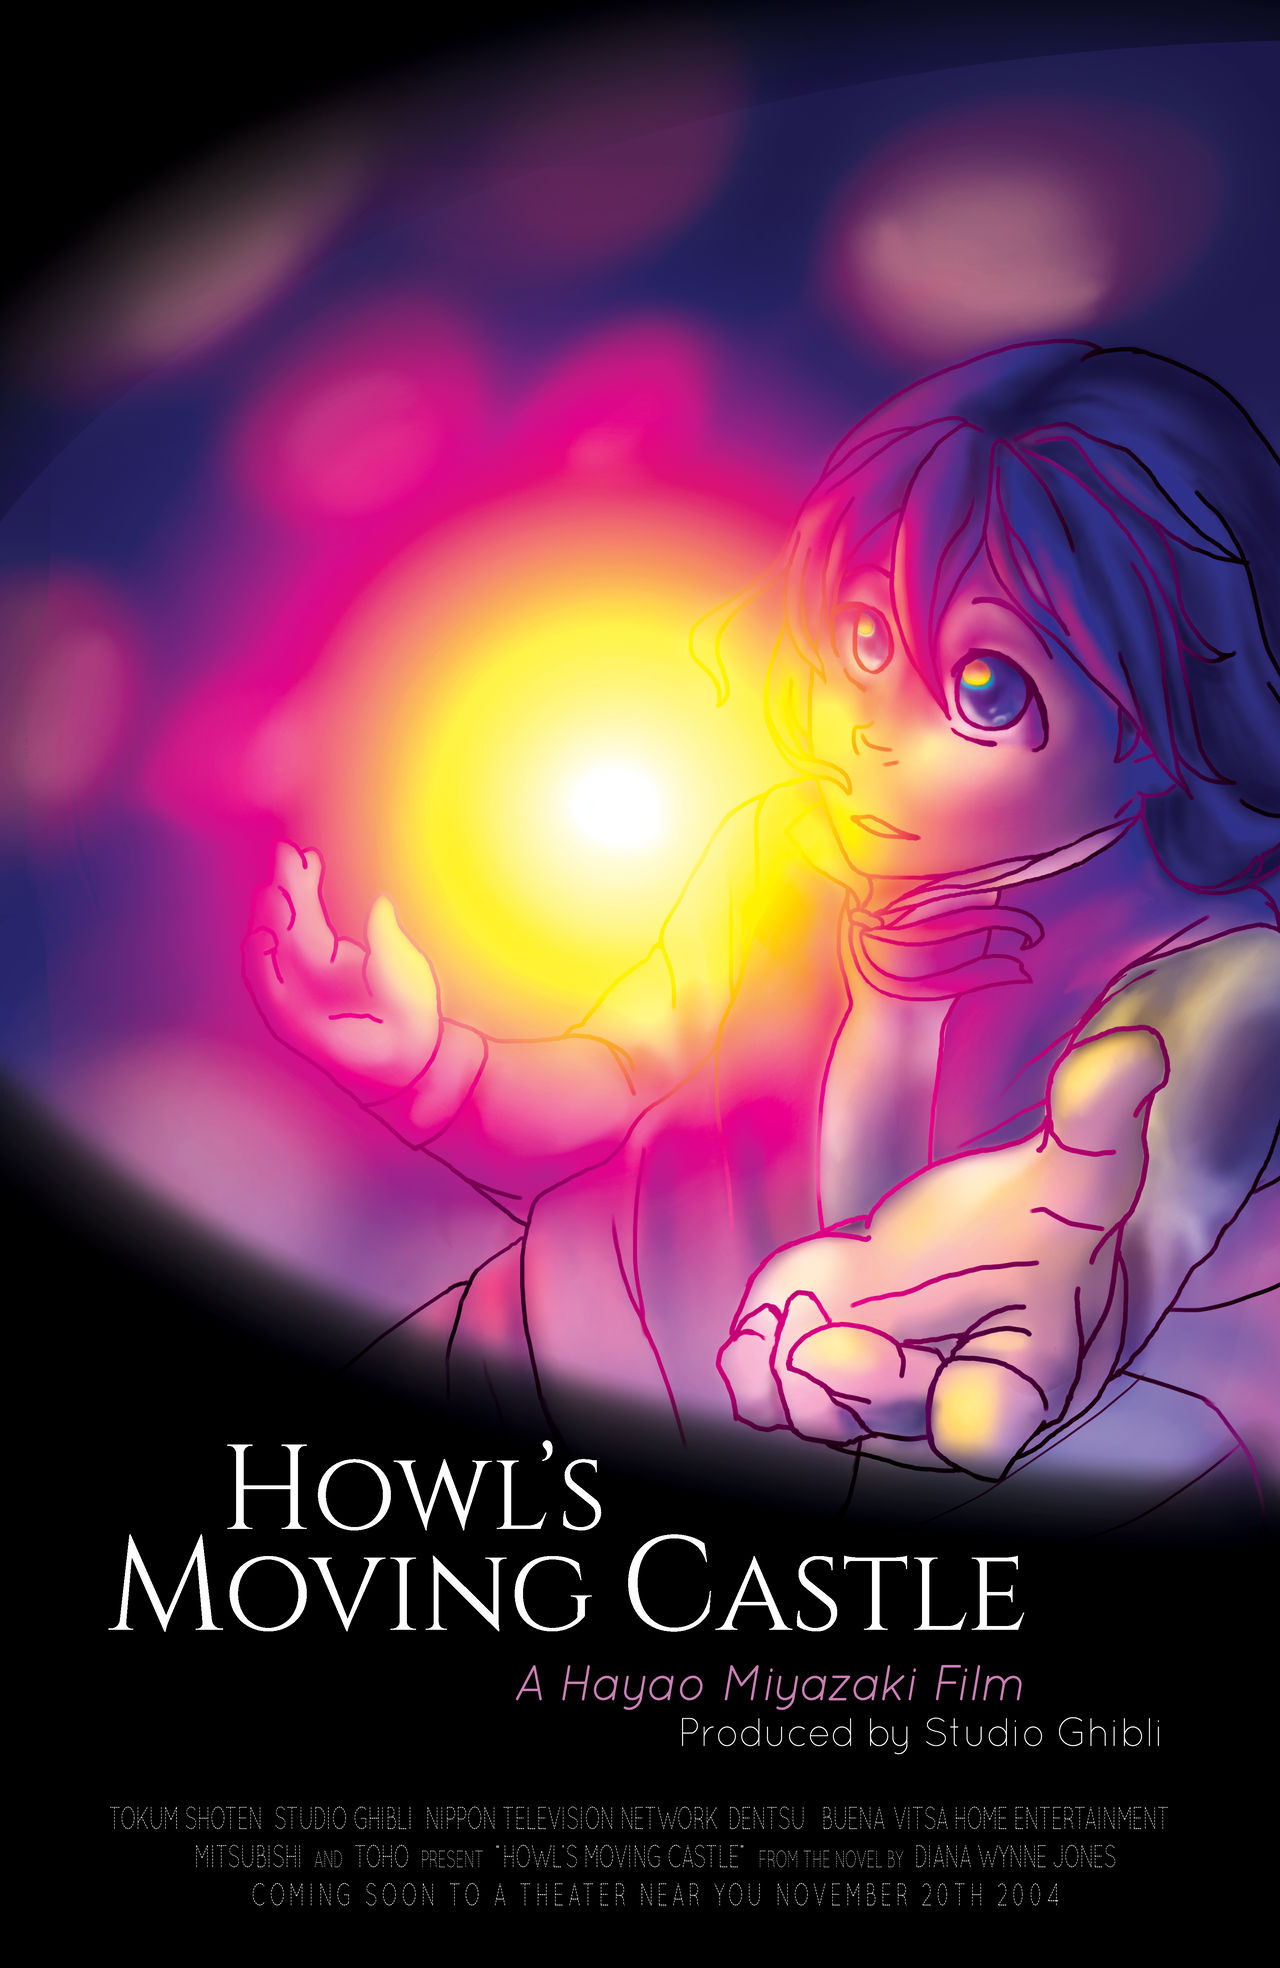 Howl's Moving Castle Poster by YoruWish on DeviantArt